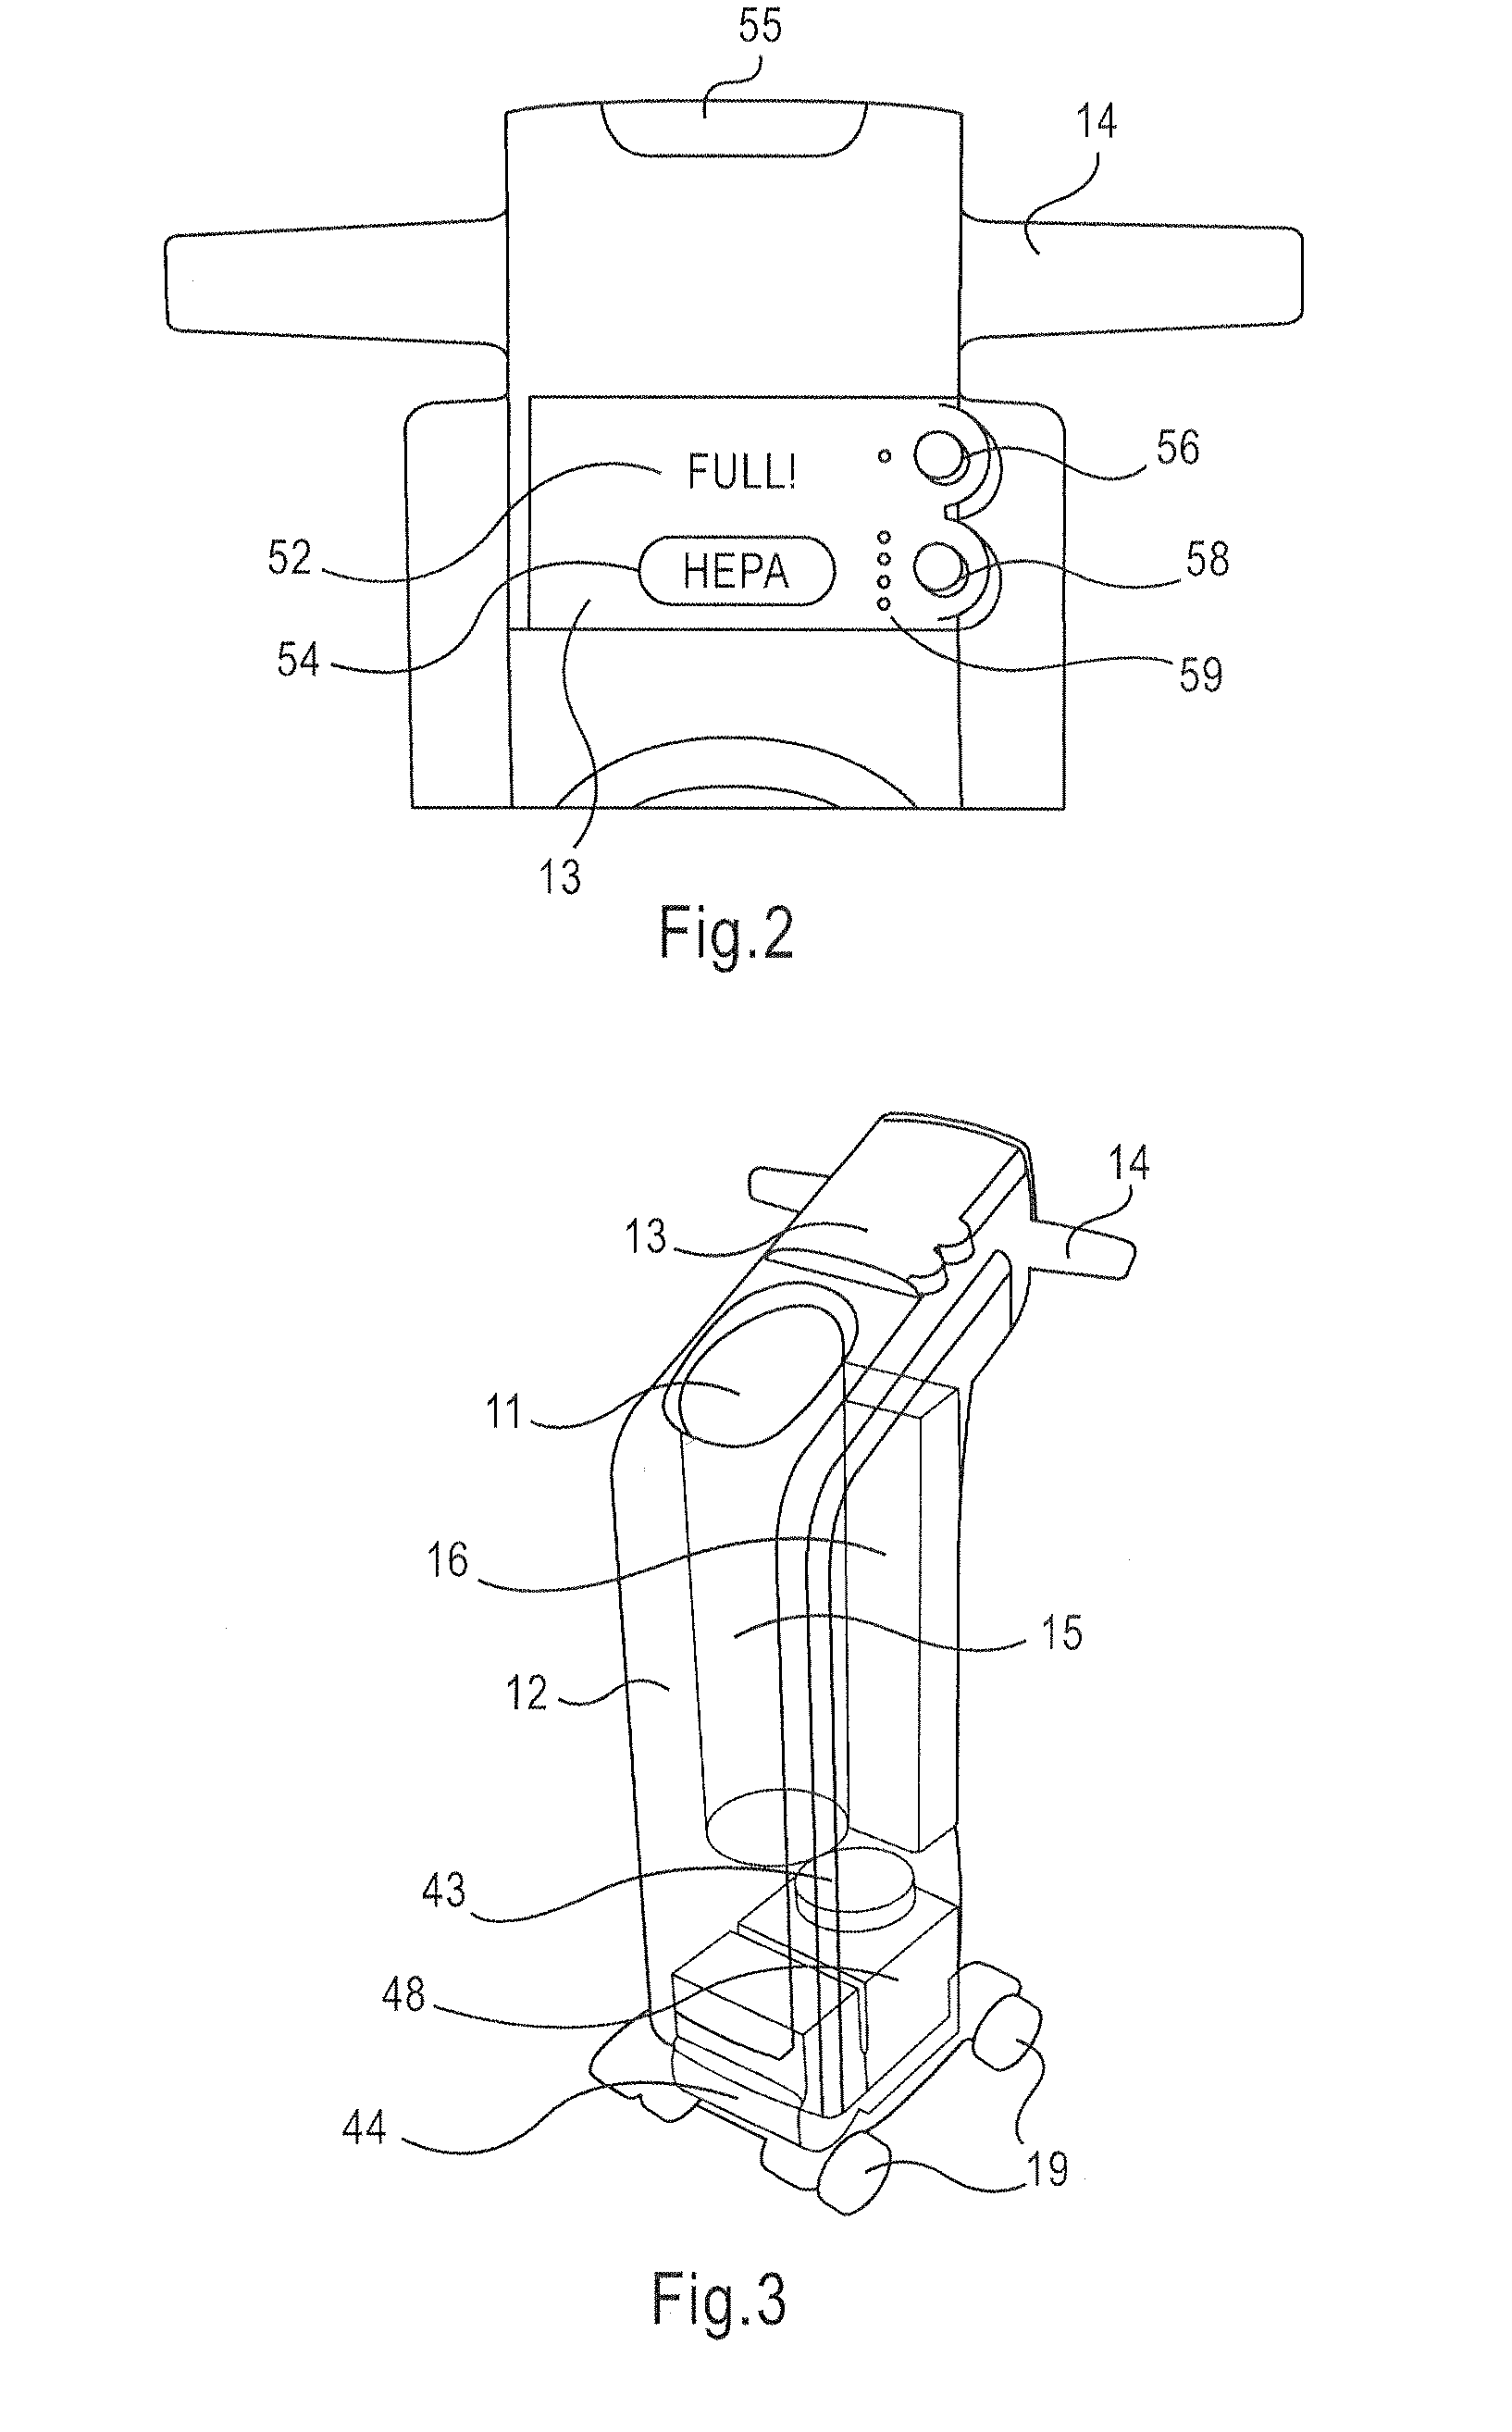 Fluid collection and disposal system having interchangeable collection and other features and methods relating thereto